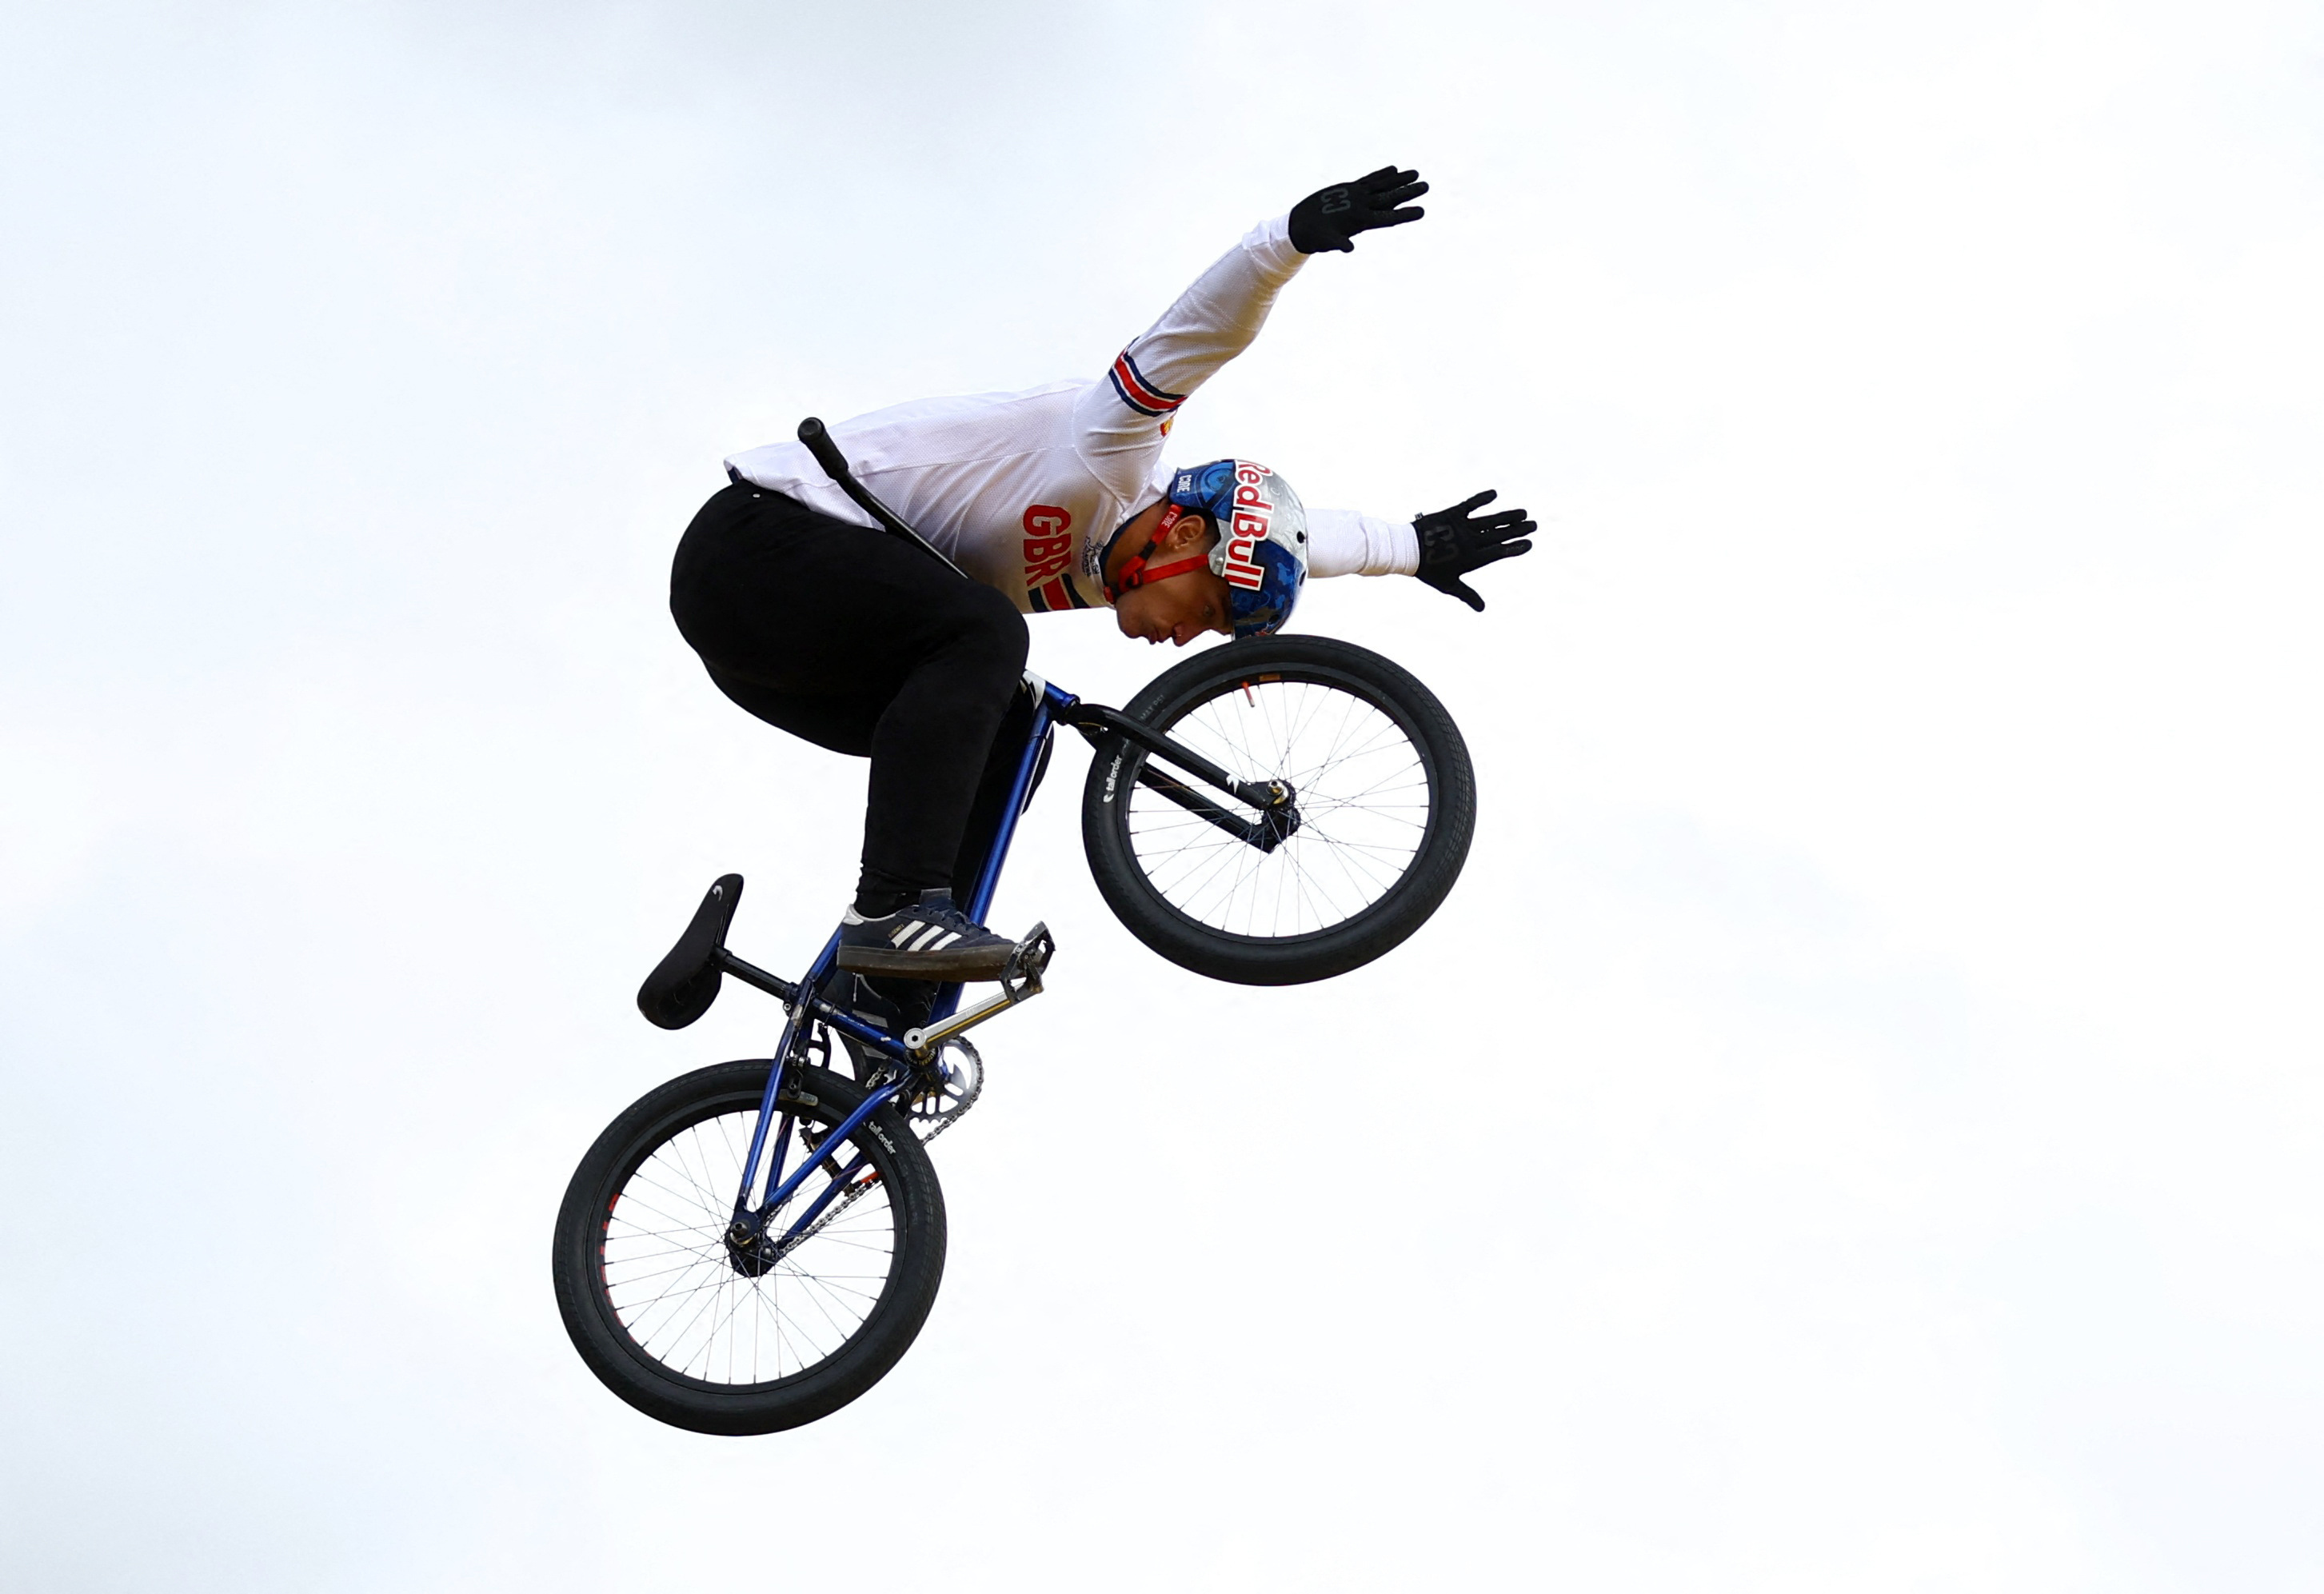 Britain's Reilly and American Roberts soar to BMX freestyle golds